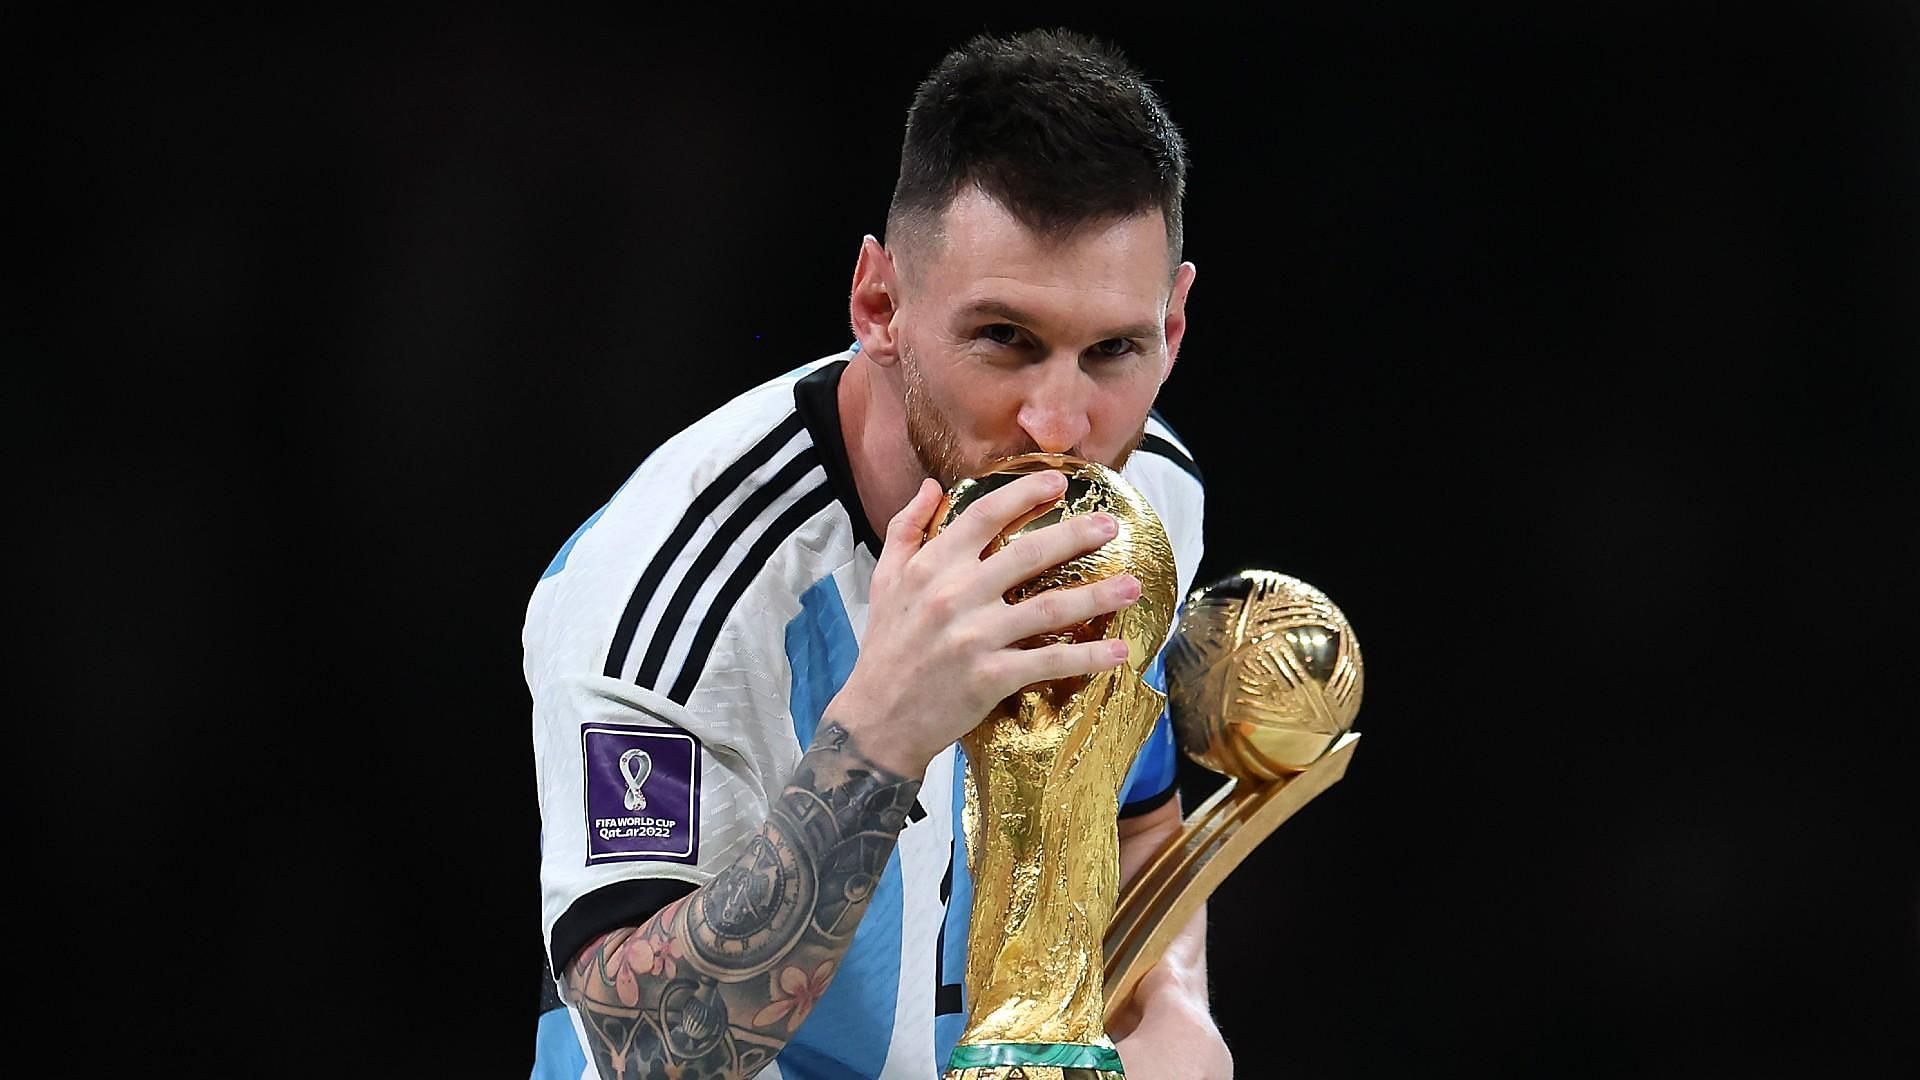 Lionel Messi led Argentina lifted the coveted FIFA World Cup in December 2022 defeating France in the final held at Lusail